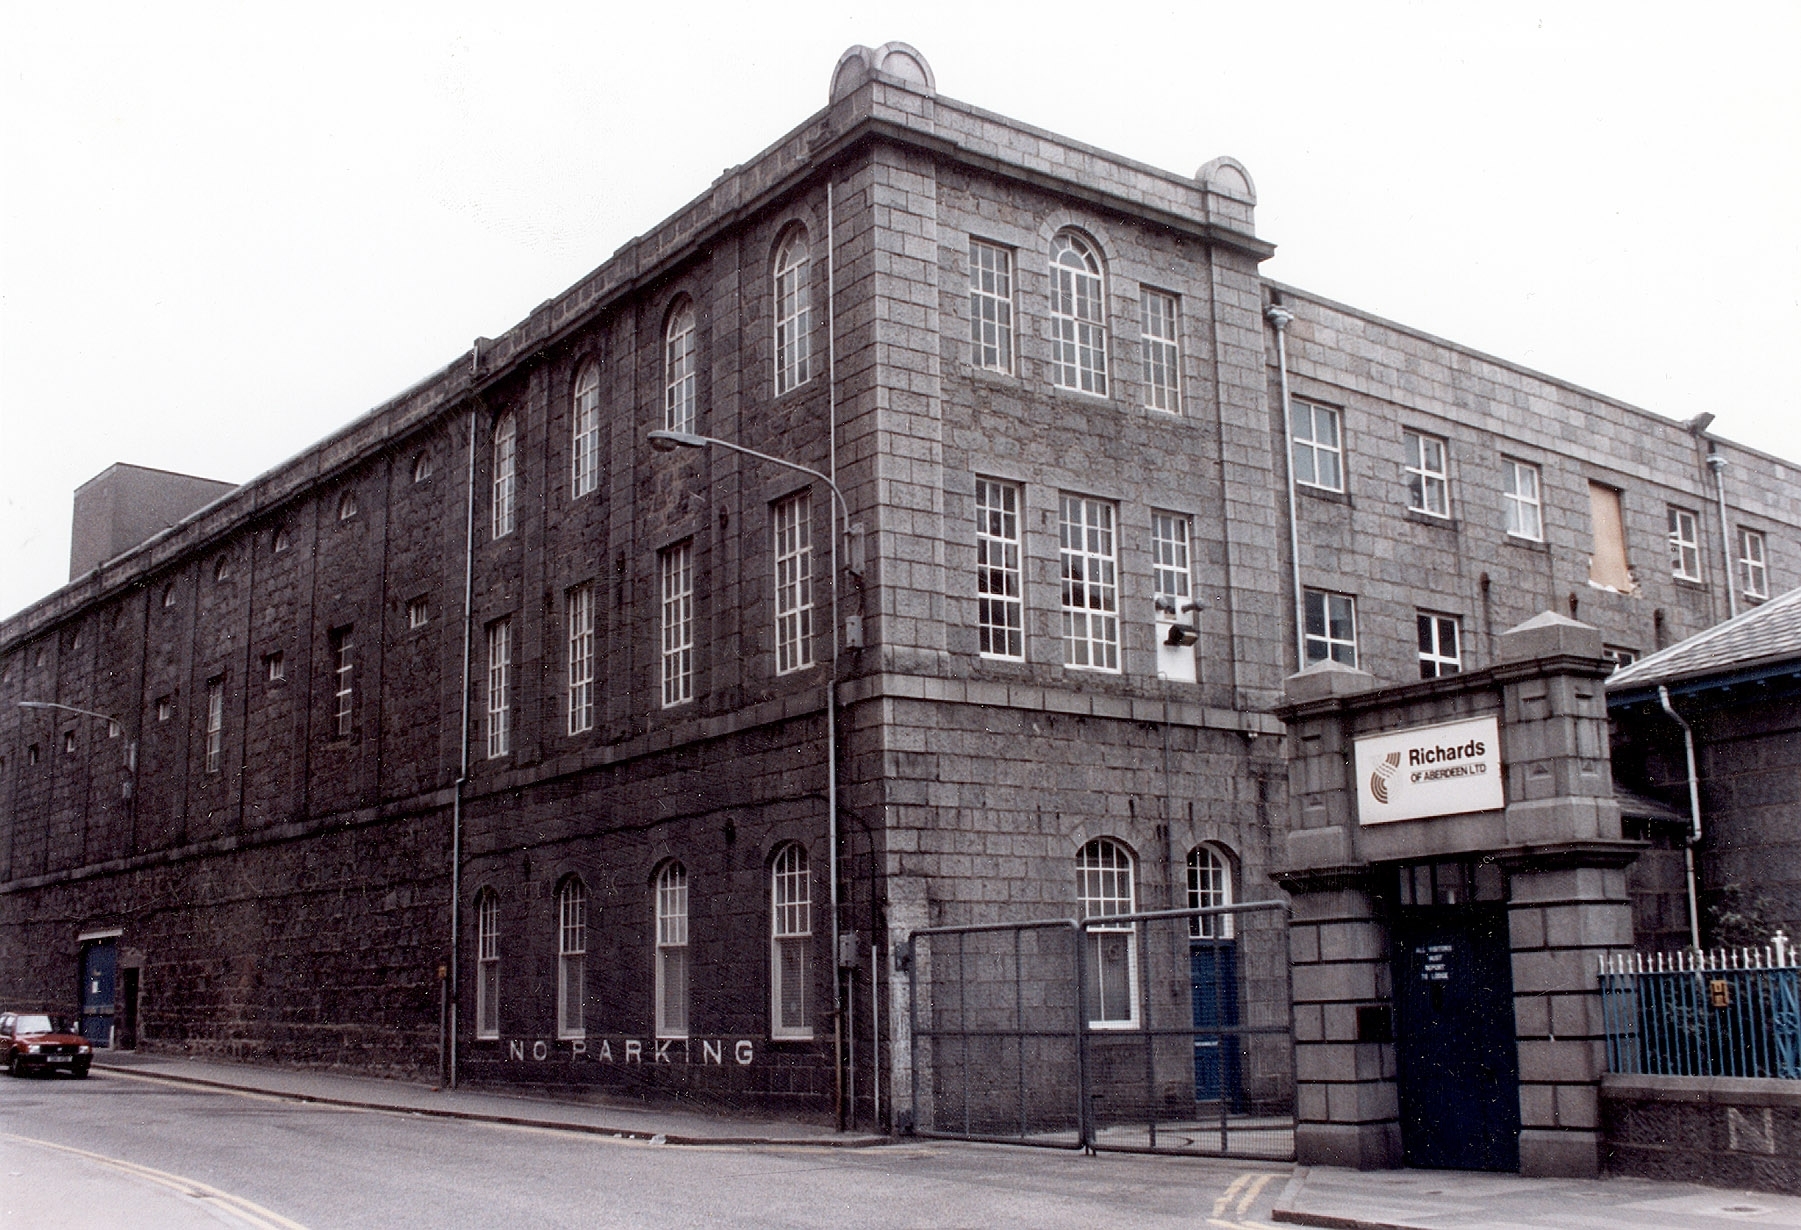 The iconic Broadford Works site before it fell into disrepair. 1996.